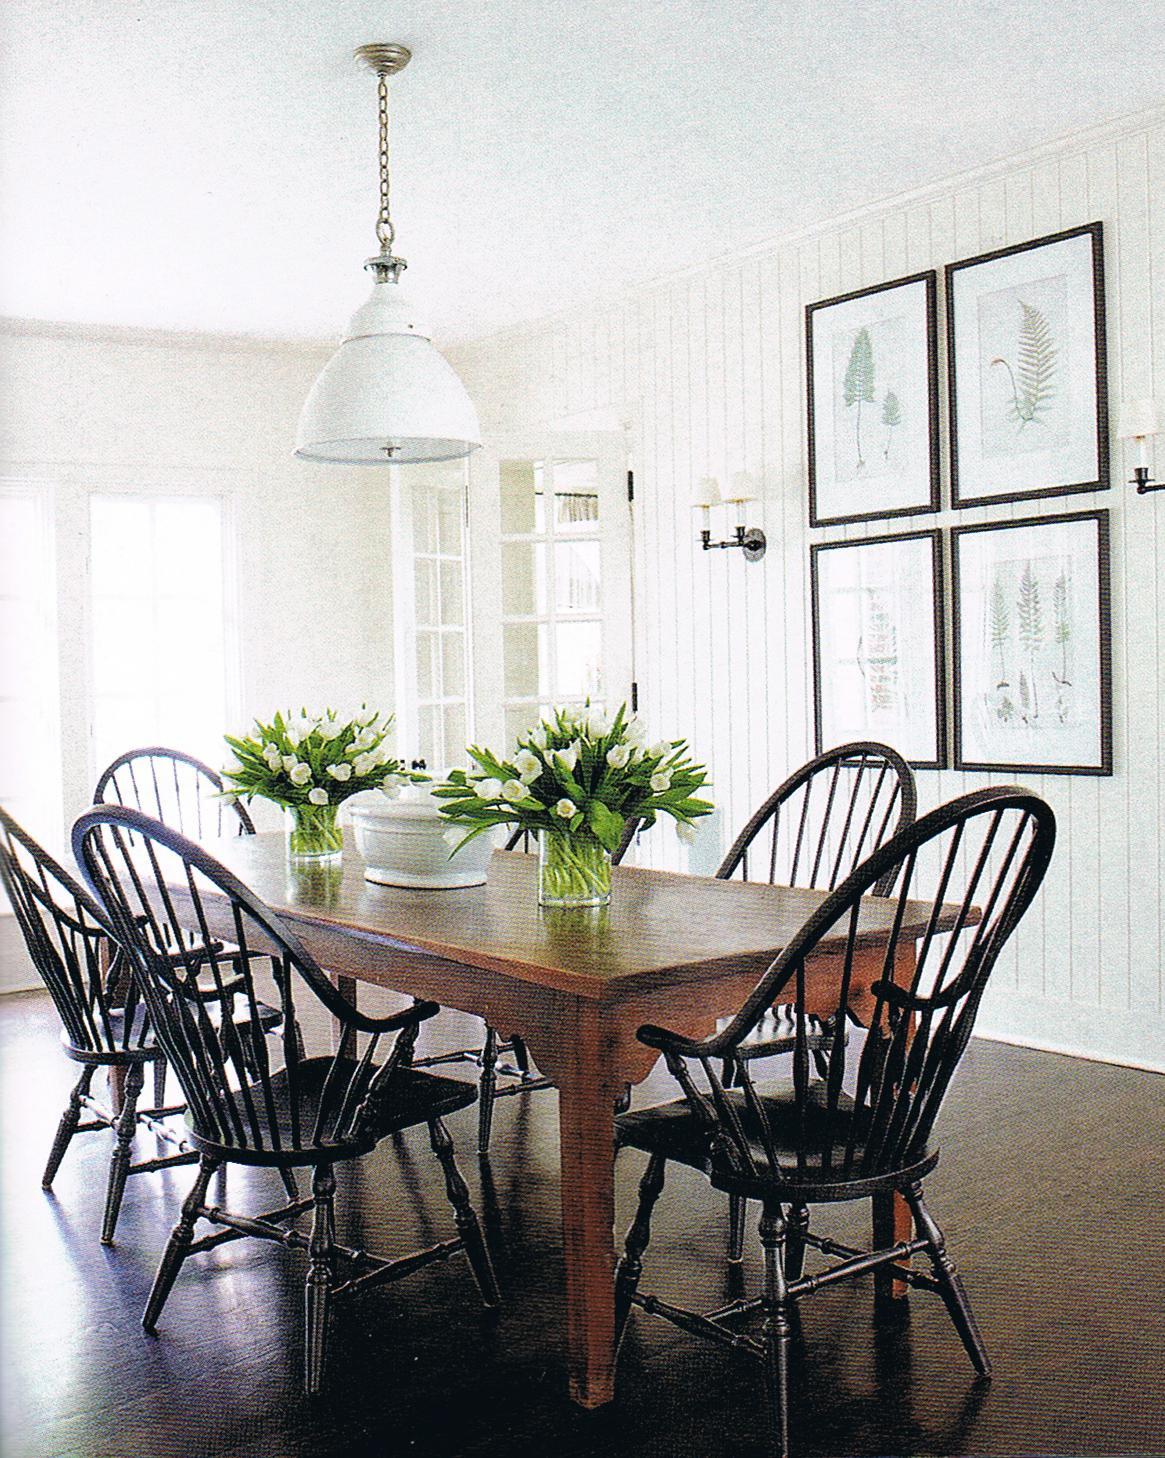 Journey Home Interior Design for Canberra: Windsor Chairs and Modern